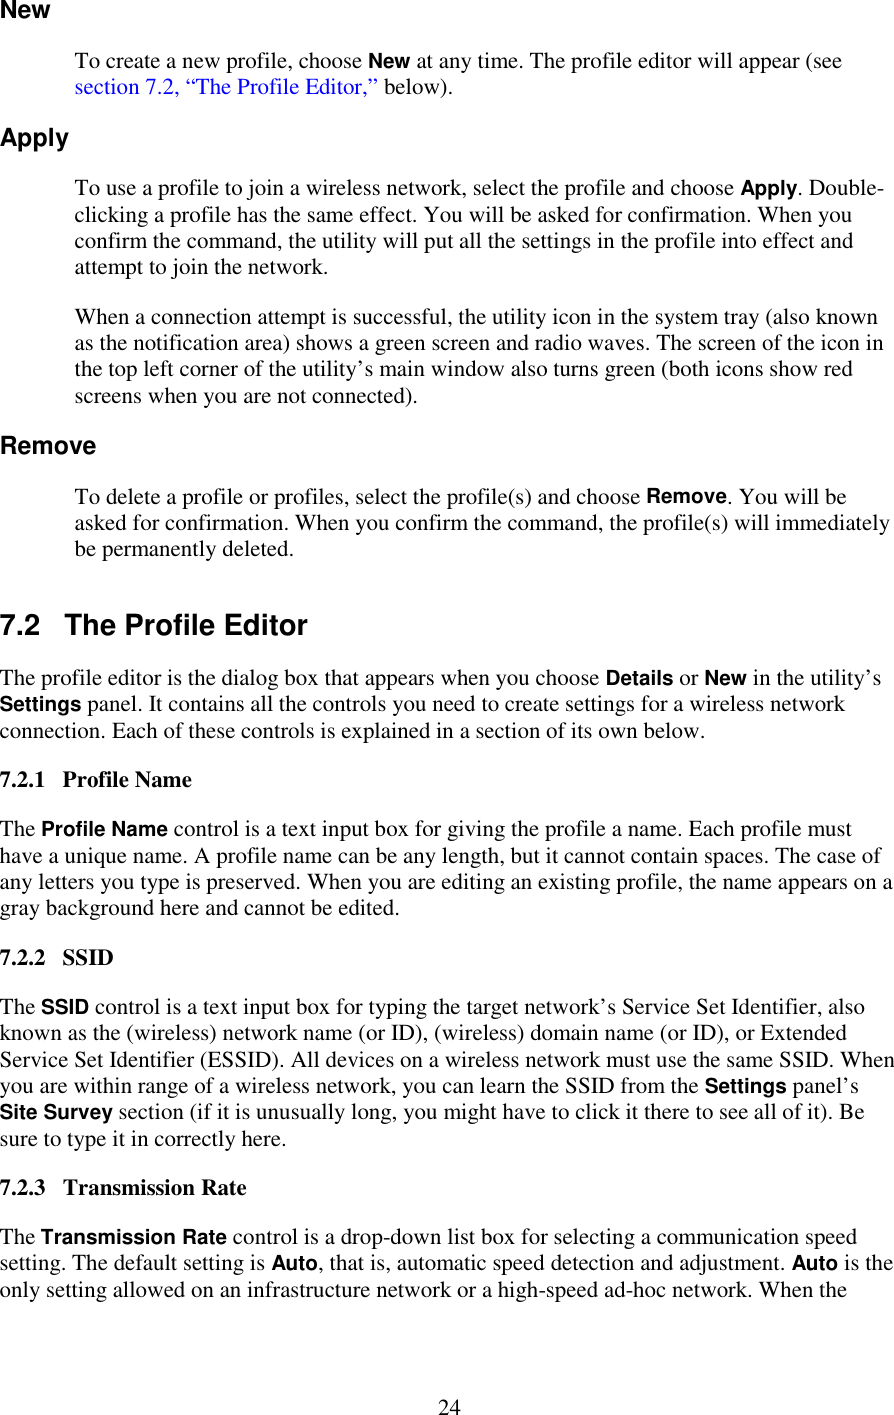   24 New To create a new profile, choose New at any time. The profile editor will appear (see section 7.2, “The Profile Editor,” below). Apply To use a profile to join a wireless network, select the profile and choose Apply. Double-clicking a profile has the same effect. You will be asked for confirmation. When you confirm the command, the utility will put all the settings in the profile into effect and attempt to join the network. When a connection attempt is successful, the utility icon in the system tray (also known as the notification area) shows a green screen and radio waves. The screen of the icon in the top left corner of the utility’s main window also turns green (both icons show red screens when you are not connected). Remove To delete a profile or profiles, select the profile(s) and choose Remove. You will be asked for confirmation. When you confirm the command, the profile(s) will immediately be permanently deleted. 7.2   The Profile Editor The profile editor is the dialog box that appears when you choose Details or New in the utility’s Settings panel. It contains all the controls you need to create settings for a wireless network connection. Each of these controls is explained in a section of its own below. 7.2.1   Profile Name The Profile Name control is a text input box for giving the profile a name. Each profile must have a unique name. A profile name can be any length, but it cannot contain spaces. The case of any letters you type is preserved. When you are editing an existing profile, the name appears on a gray background here and cannot be edited. 7.2.2   SSID The SSID control is a text input box for typing the target network’s Service Set Identifier, also known as the (wireless) network name (or ID), (wireless) domain name (or ID), or Extended Service Set Identifier (ESSID). All devices on a wireless network must use the same SSID. When you are within range of a wireless network, you can learn the SSID from the Settings panel’s Site Survey section (if it is unusually long, you might have to click it there to see all of it). Be sure to type it in correctly here. 7.2.3   Transmission Rate The Transmission Rate control is a drop-down list box for selecting a communication speed setting. The default setting is Auto, that is, automatic speed detection and adjustment. Auto is the only setting allowed on an infrastructure network or a high-speed ad-hoc network. When the 